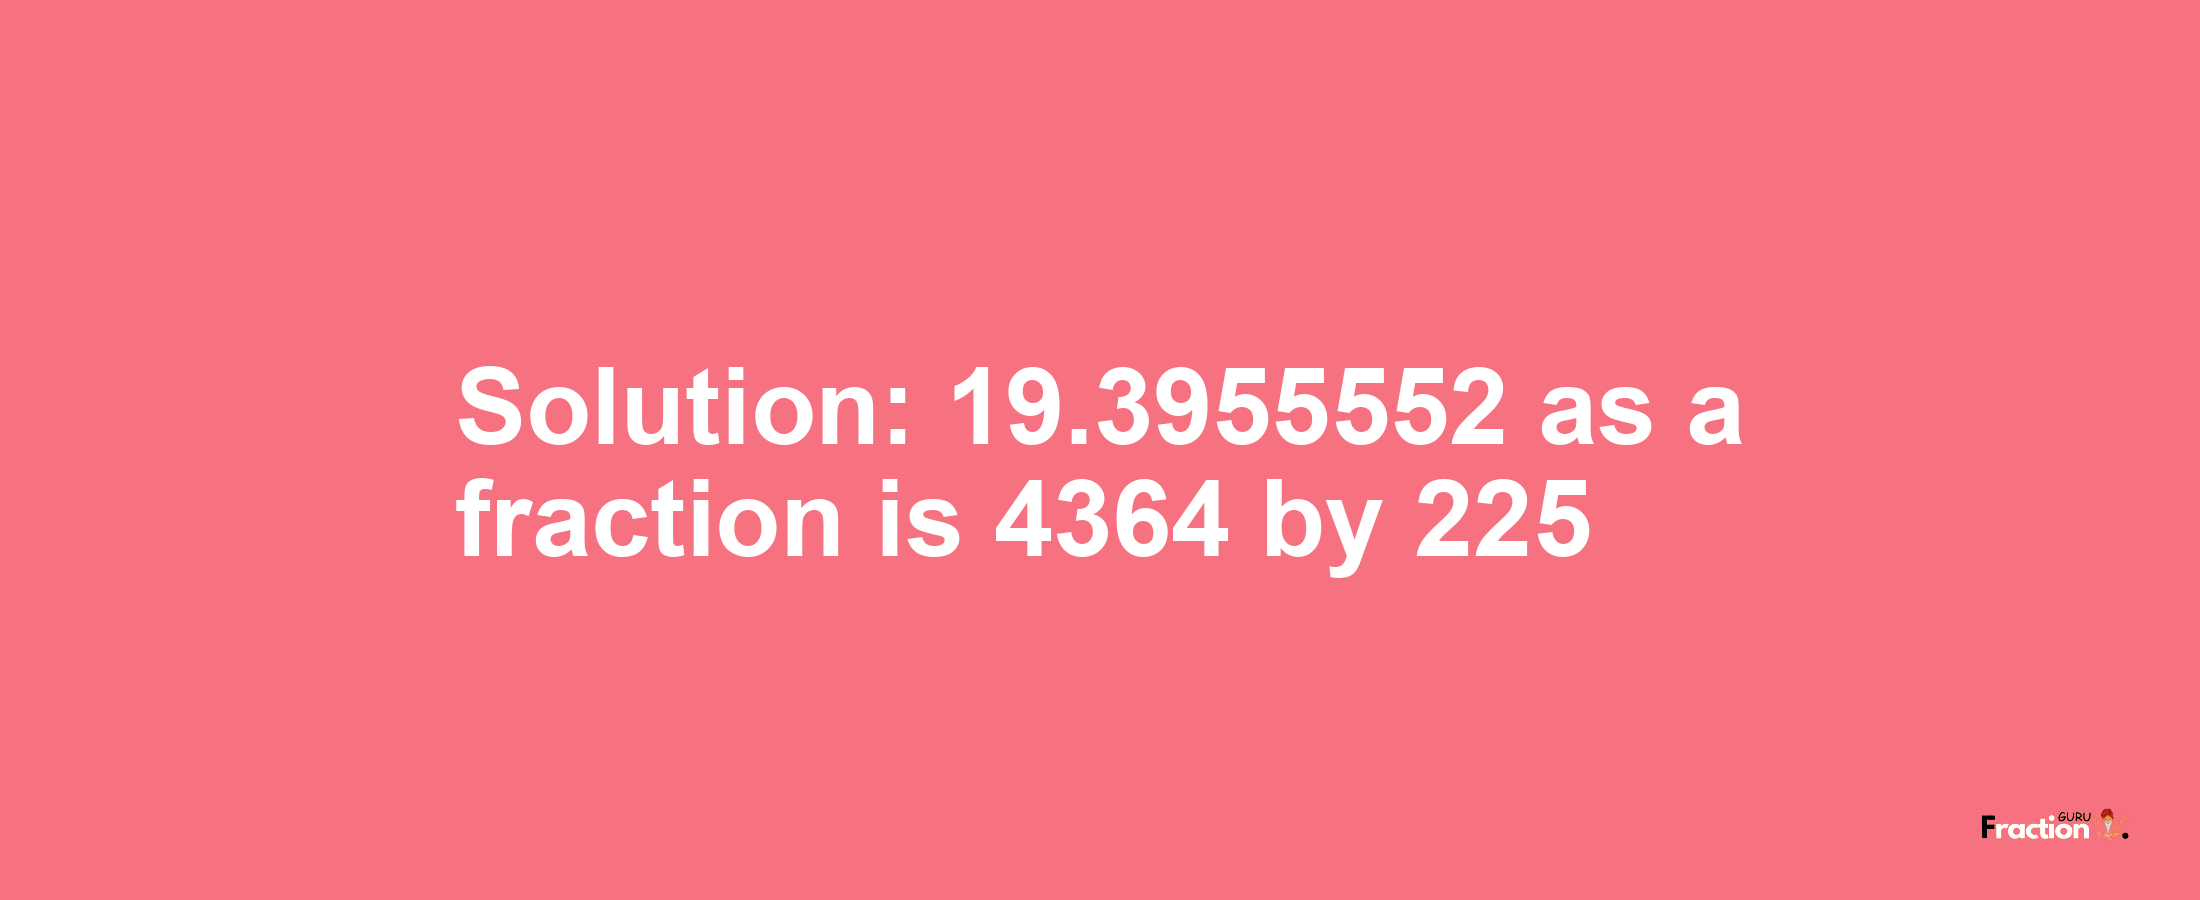 Solution:19.3955552 as a fraction is 4364/225